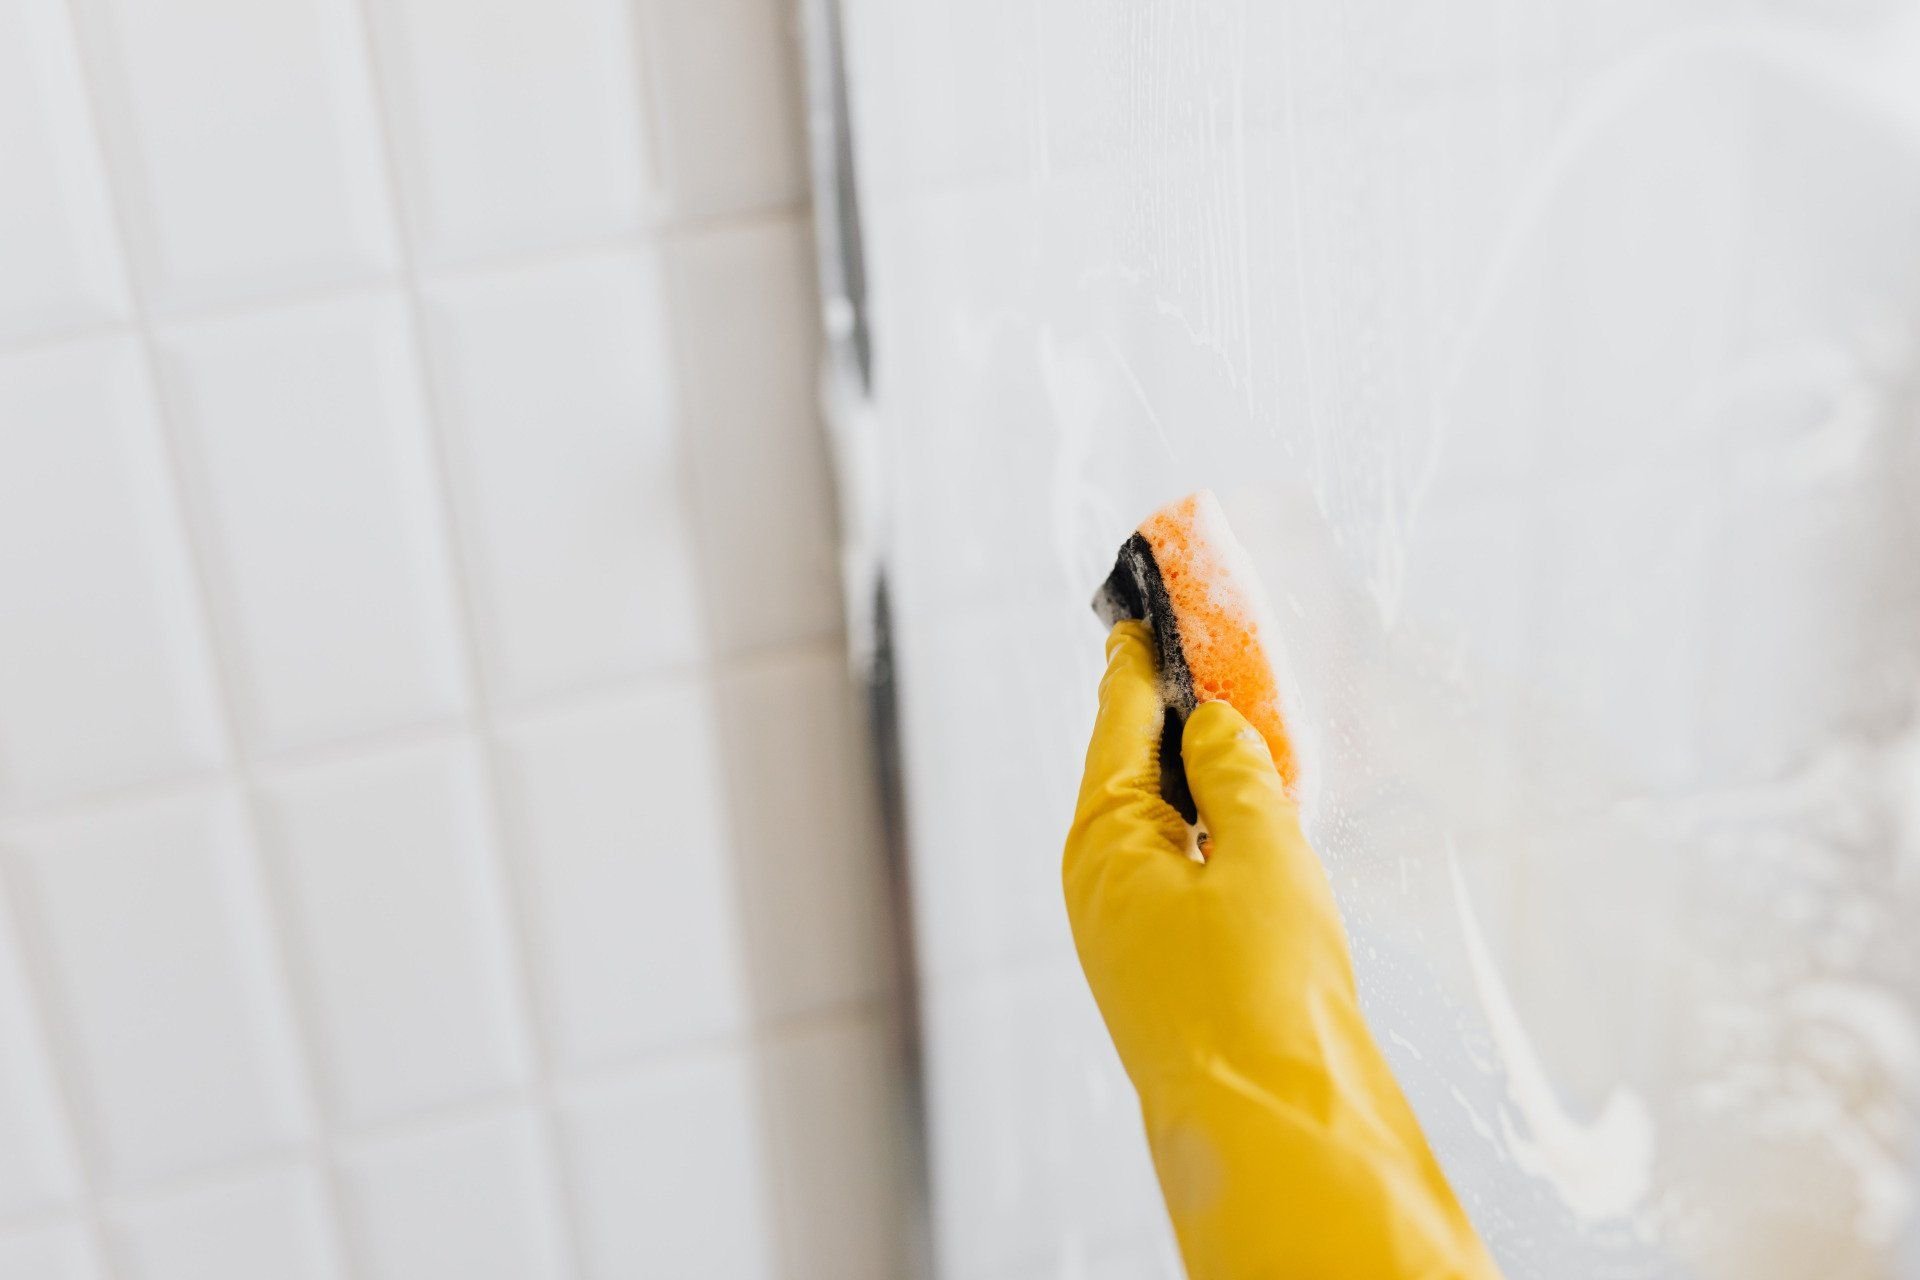 Person cleaning a glass partition in a bathroom using a sponge.